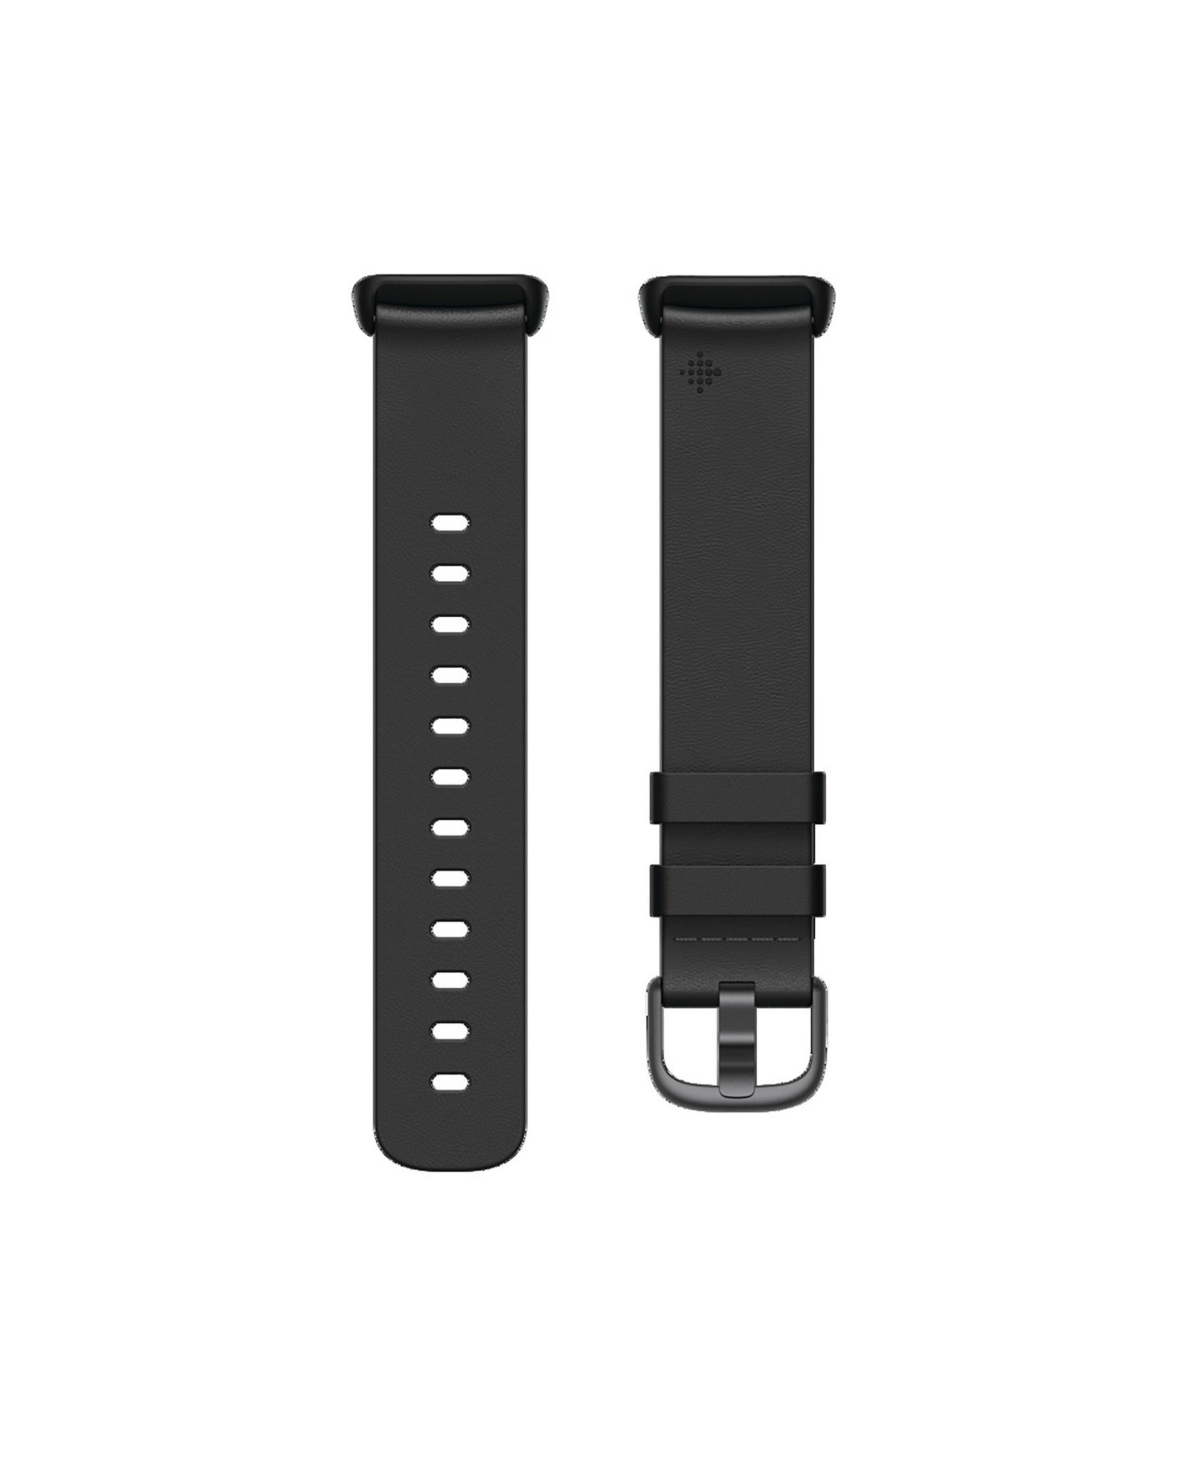 Fitbit Luxe Fitness Tracker in Core Black with Graphite Black Wrist Band -  Macy's